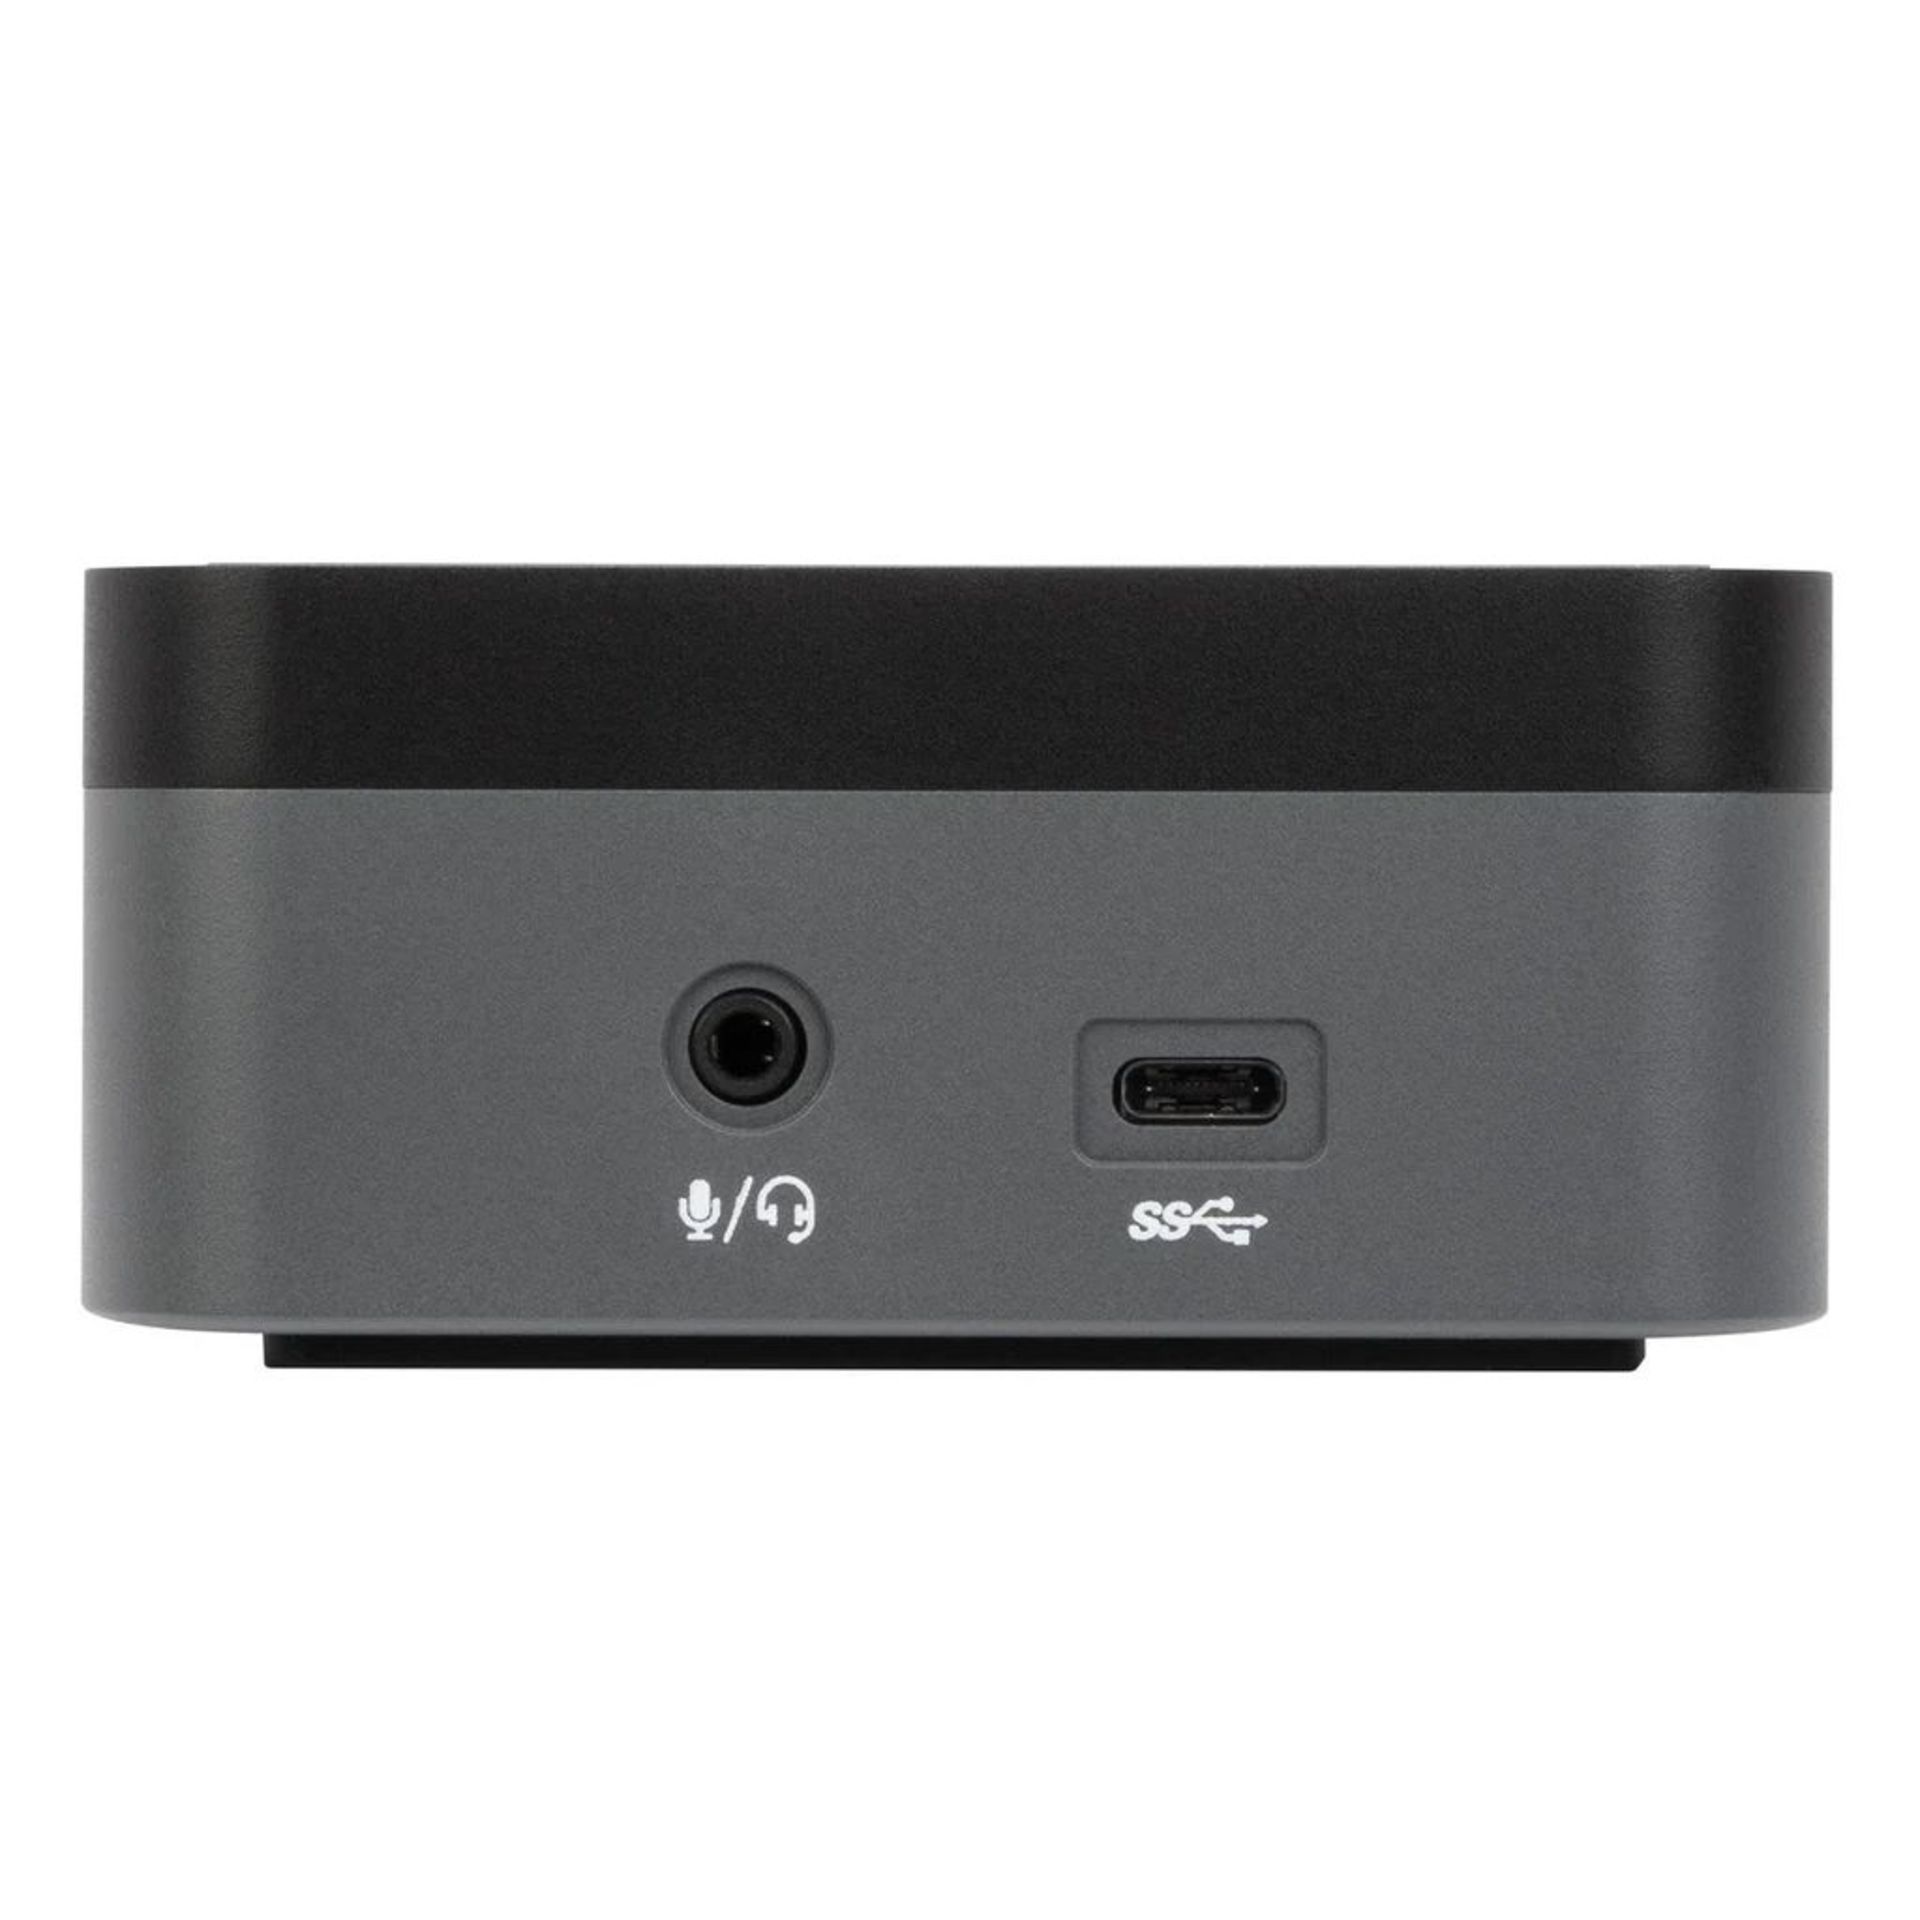 NEW & BOXED TARGUS Four Head 4K Dock With 100w Docking Station (DOCK570EUZ-82). RRP £351.89. Boost - Image 6 of 8